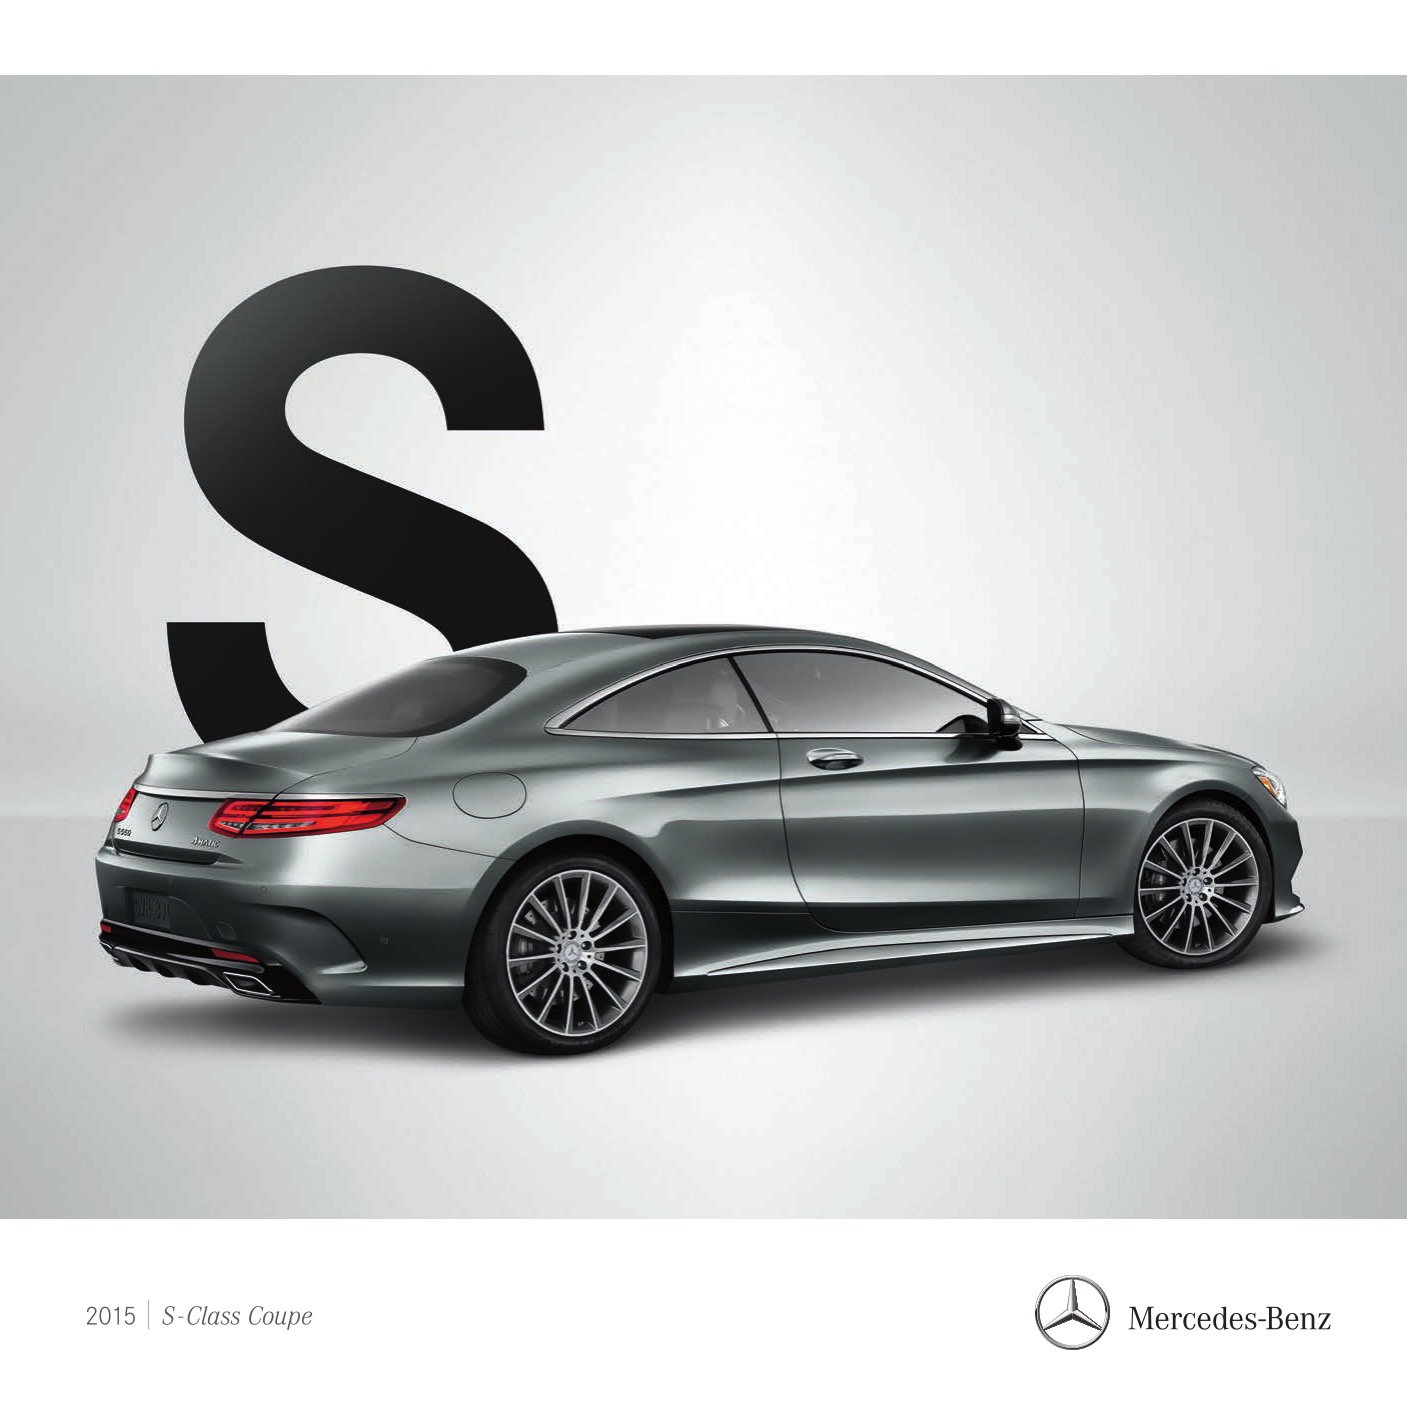 2015 Mercedes-Benz S-Class Coupe Brochure Page 7